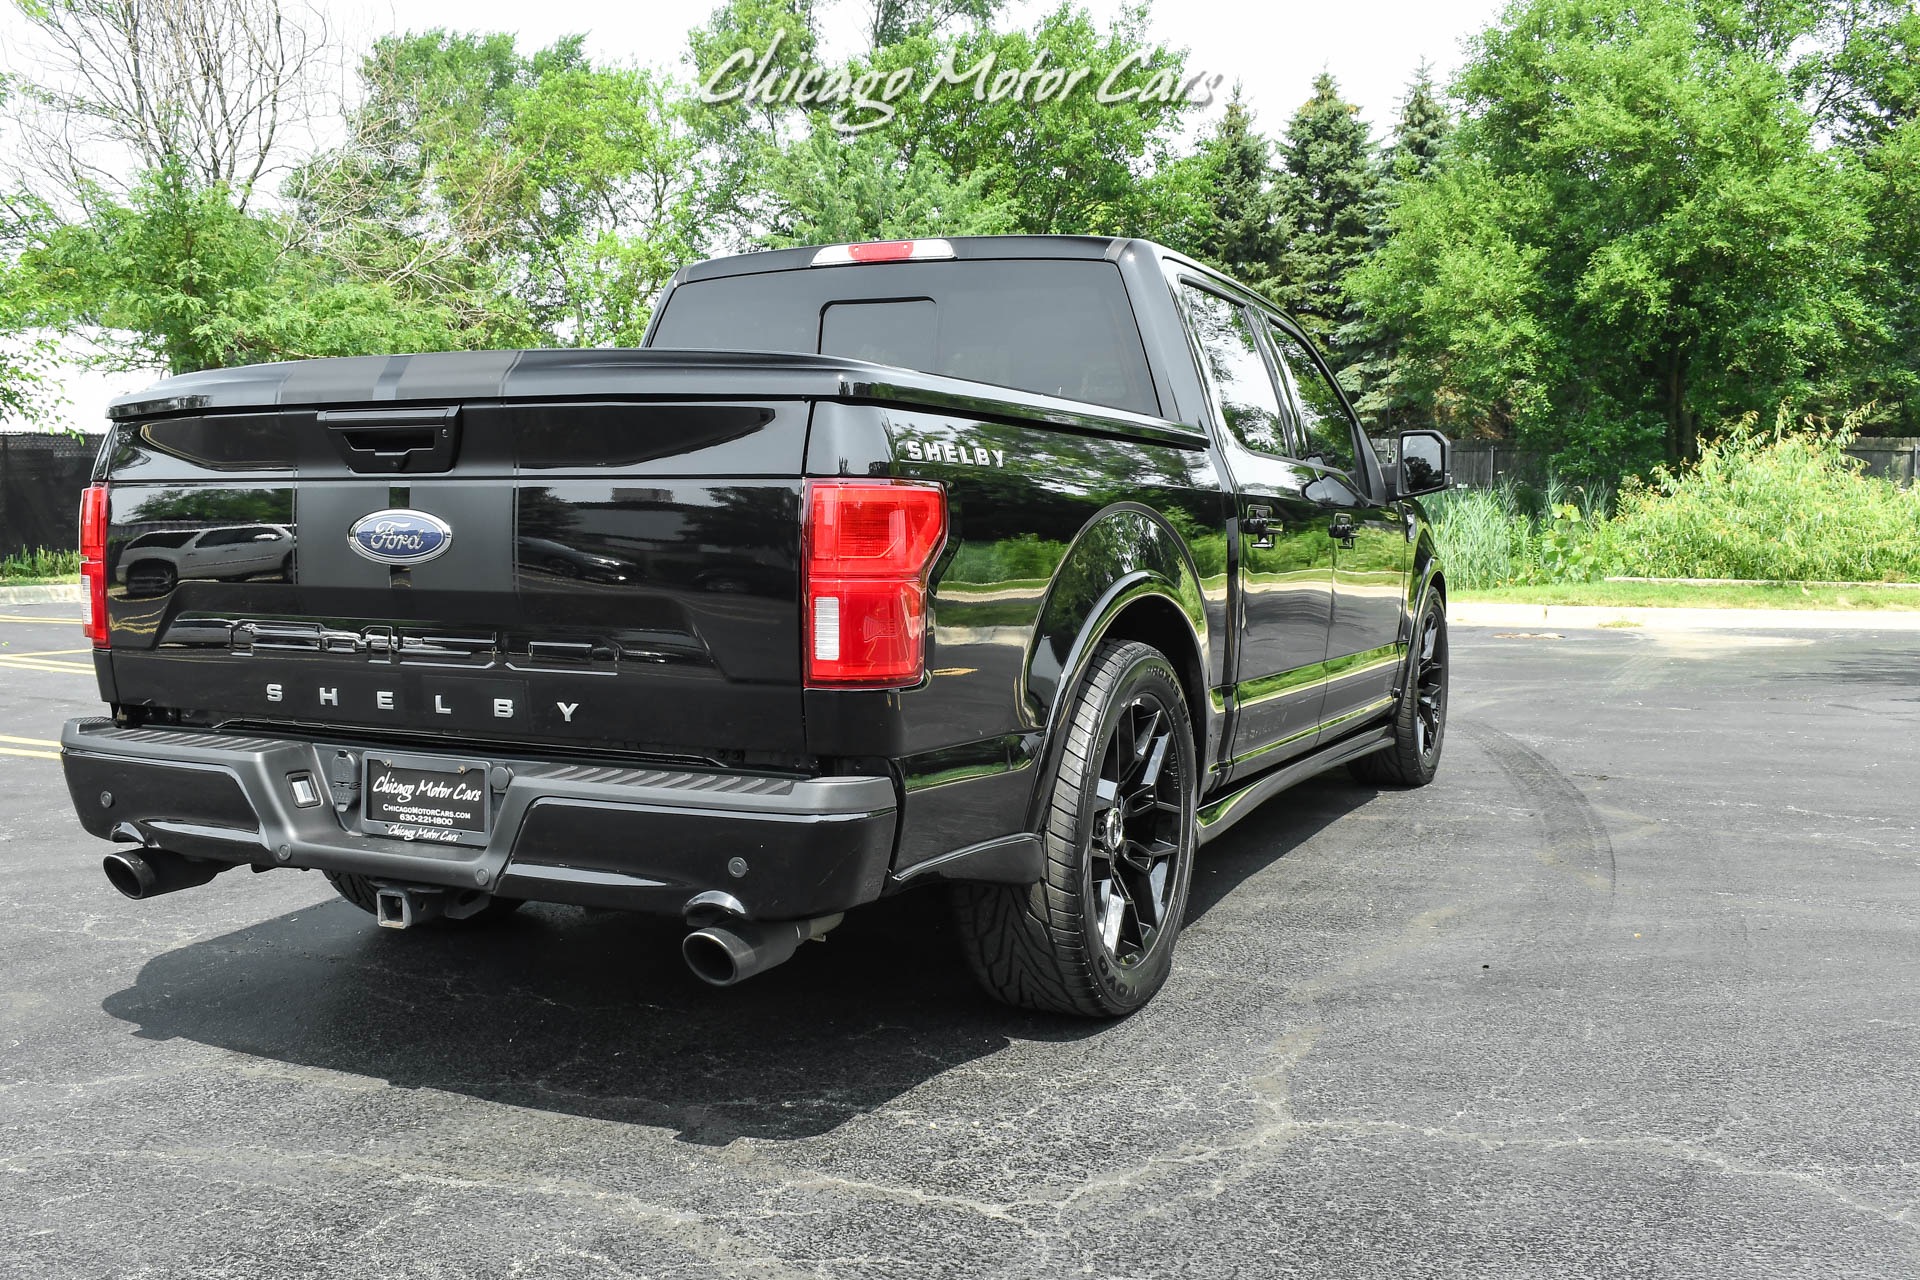 Used-2020-Ford-F-150-F150-Shelby-SuperSnake-770-Horsepower-4x4-Pickup-Truck-LOADED-RARE